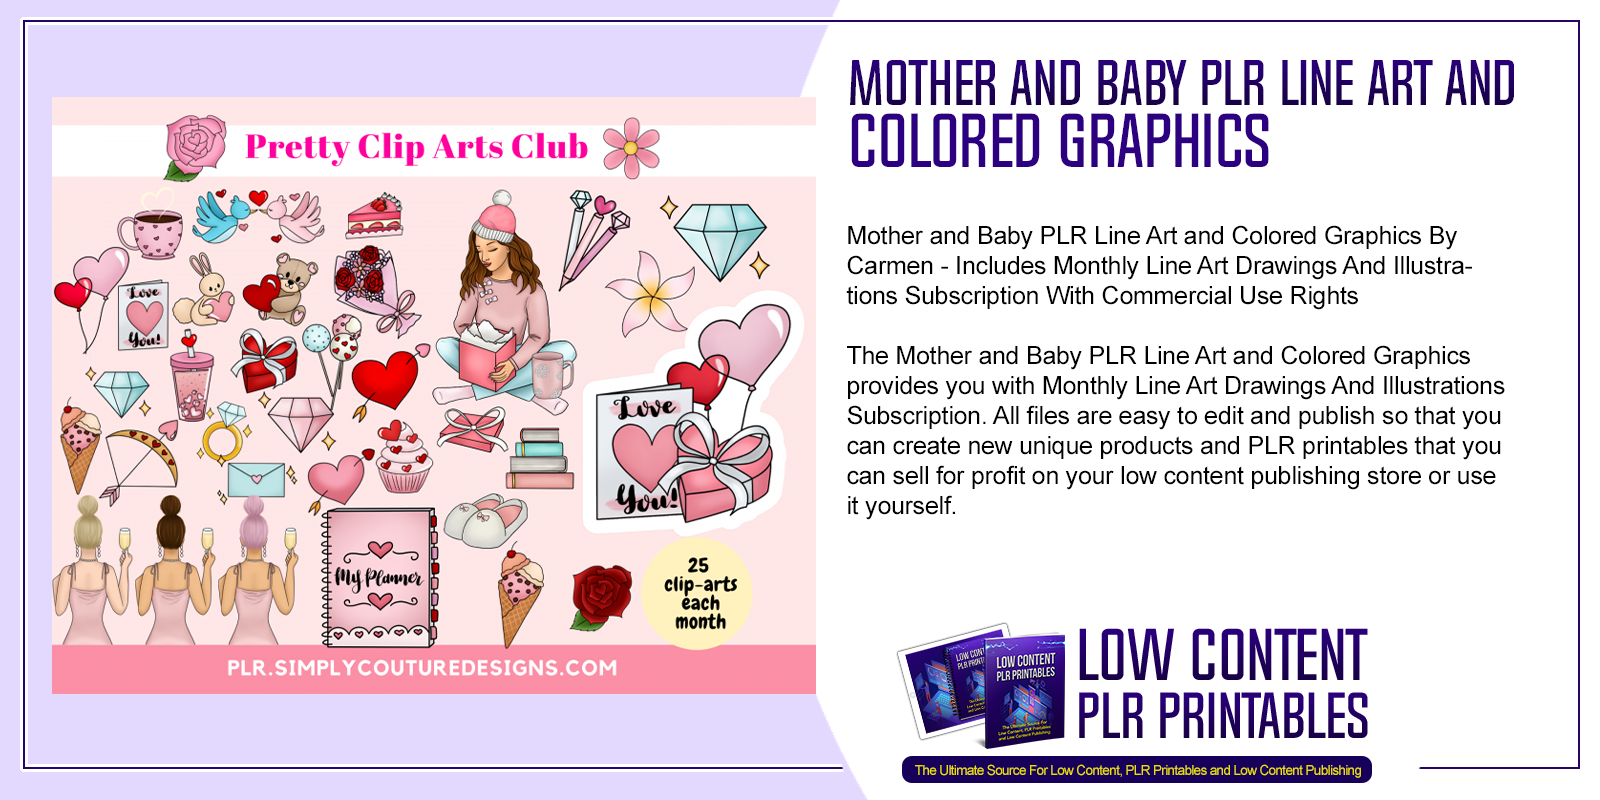 Mother and Baby PLR Line Art and Colored Graphics